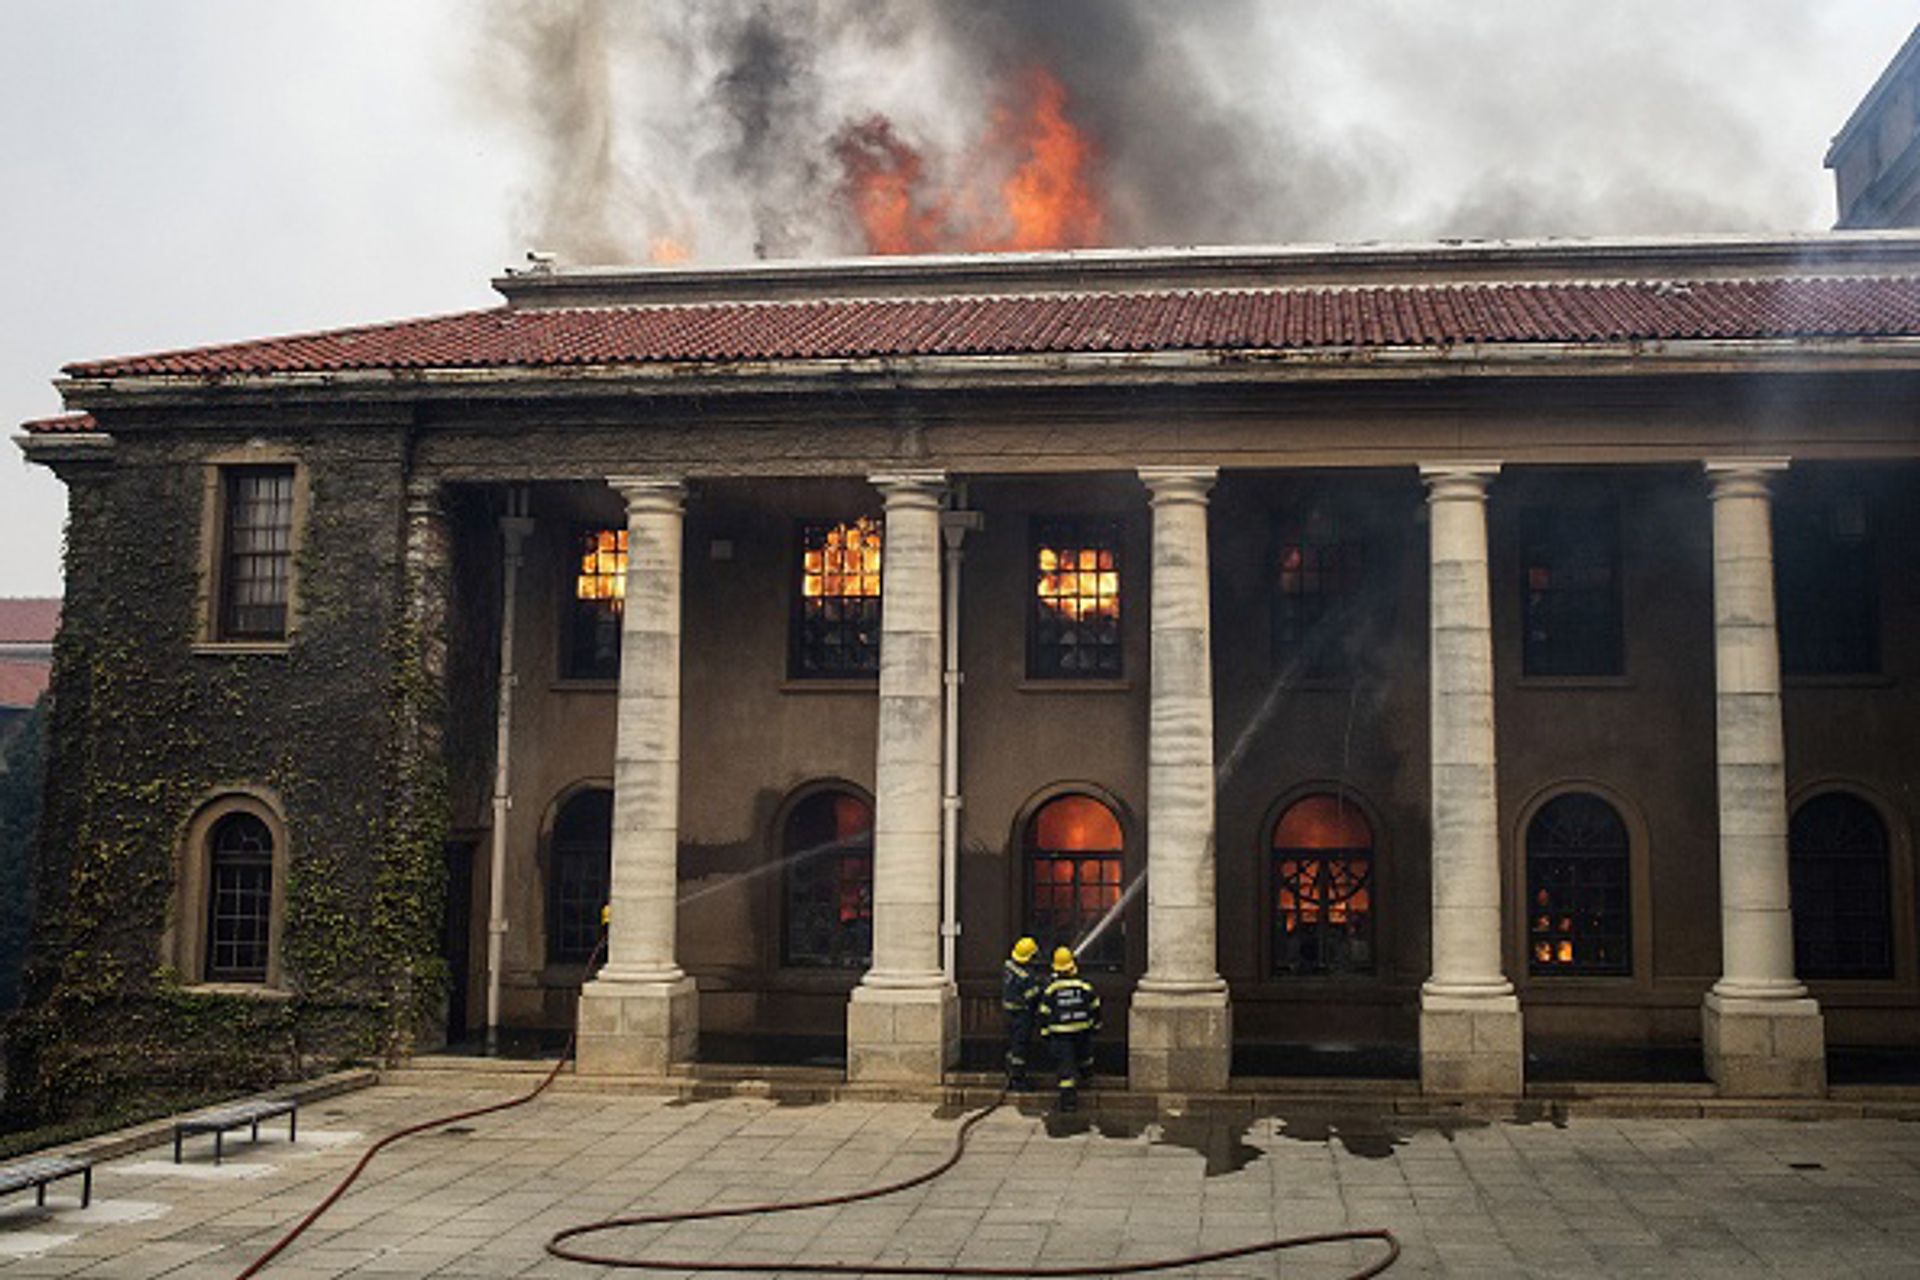 Firefighters try, in vain, to extinguish a fire in the Jagger Library, at the University of Cape Town, after a forest fire came down the foothills of Table Mountain, setting university buildings alight in Cape Town, on 18 April Photo: Rodger Bosch/AFP via Getty Images